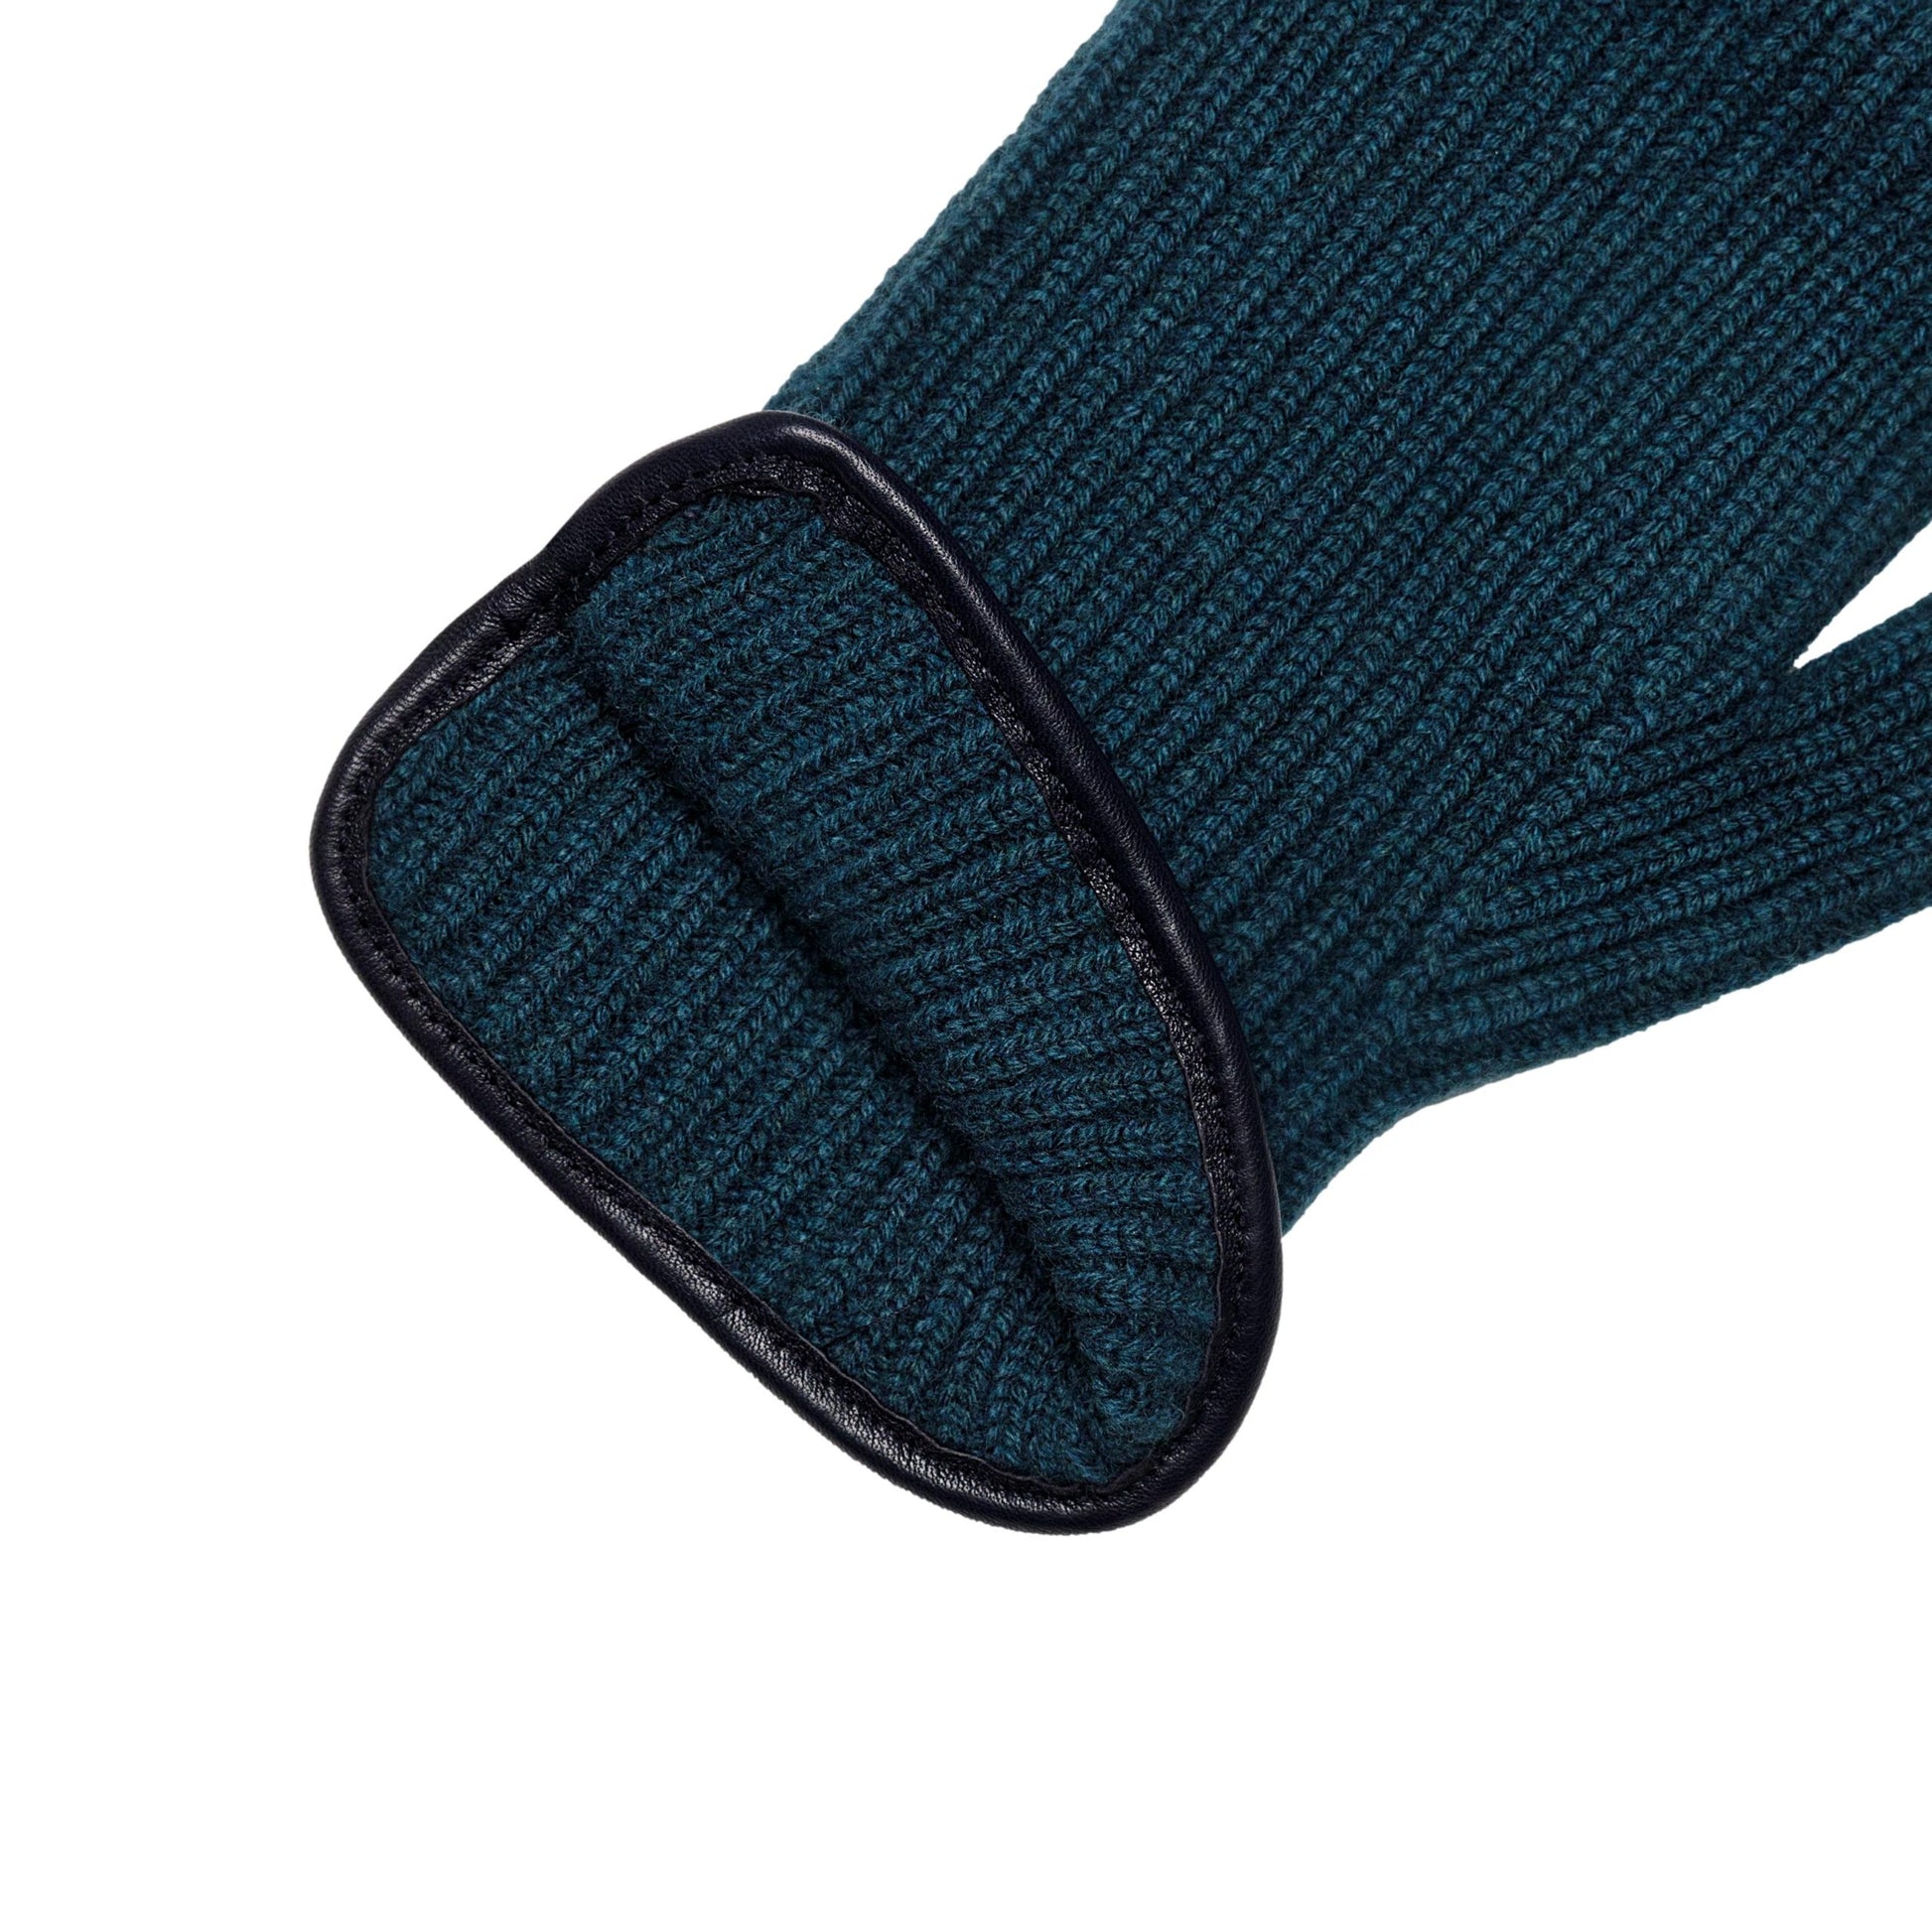 Men's natural green cashmere gloves with side opening and chrome-free leather piping